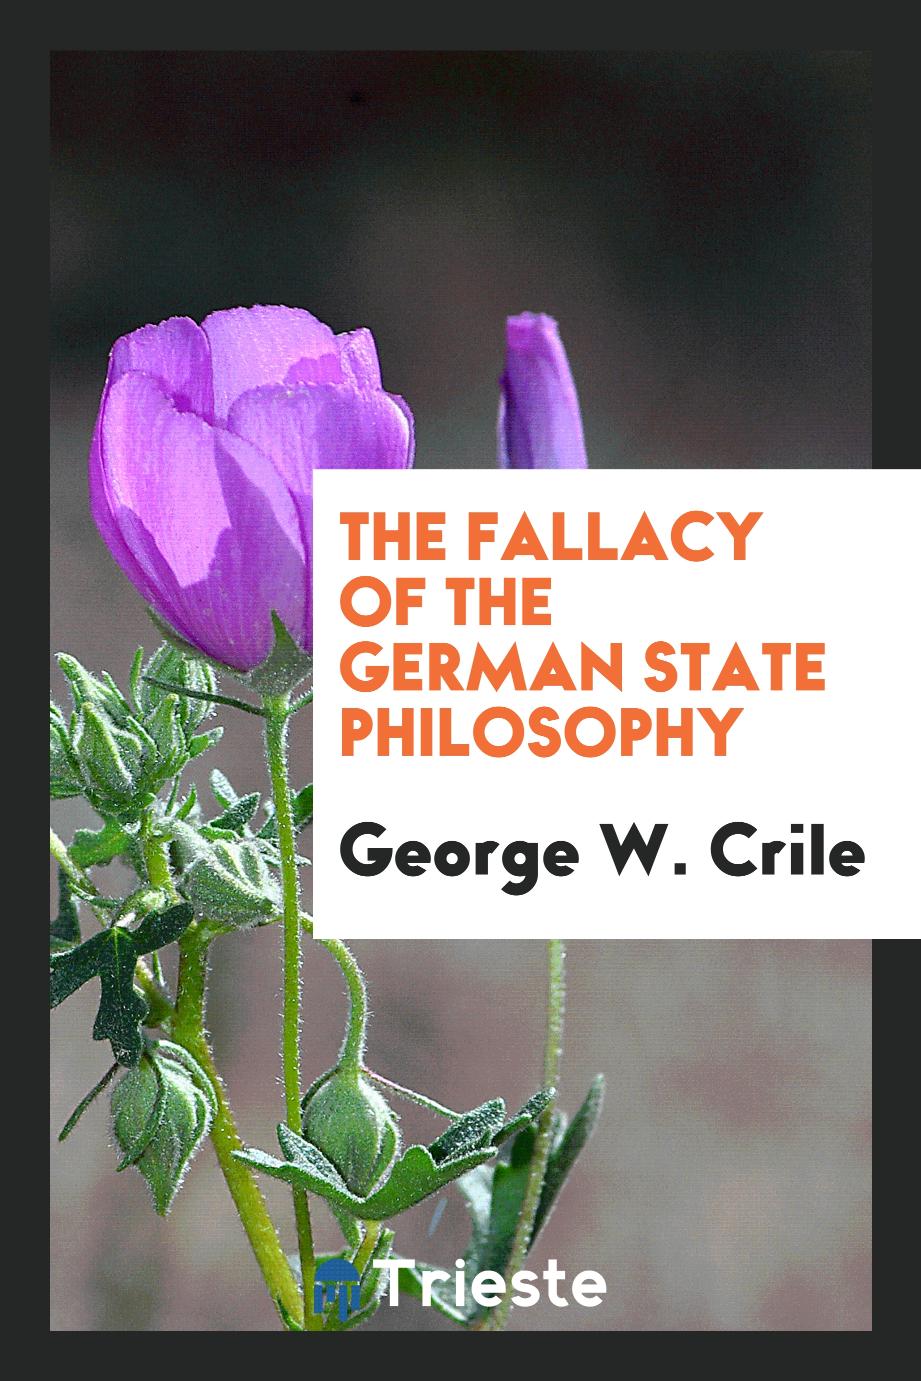 The fallacy of the German state philosophy